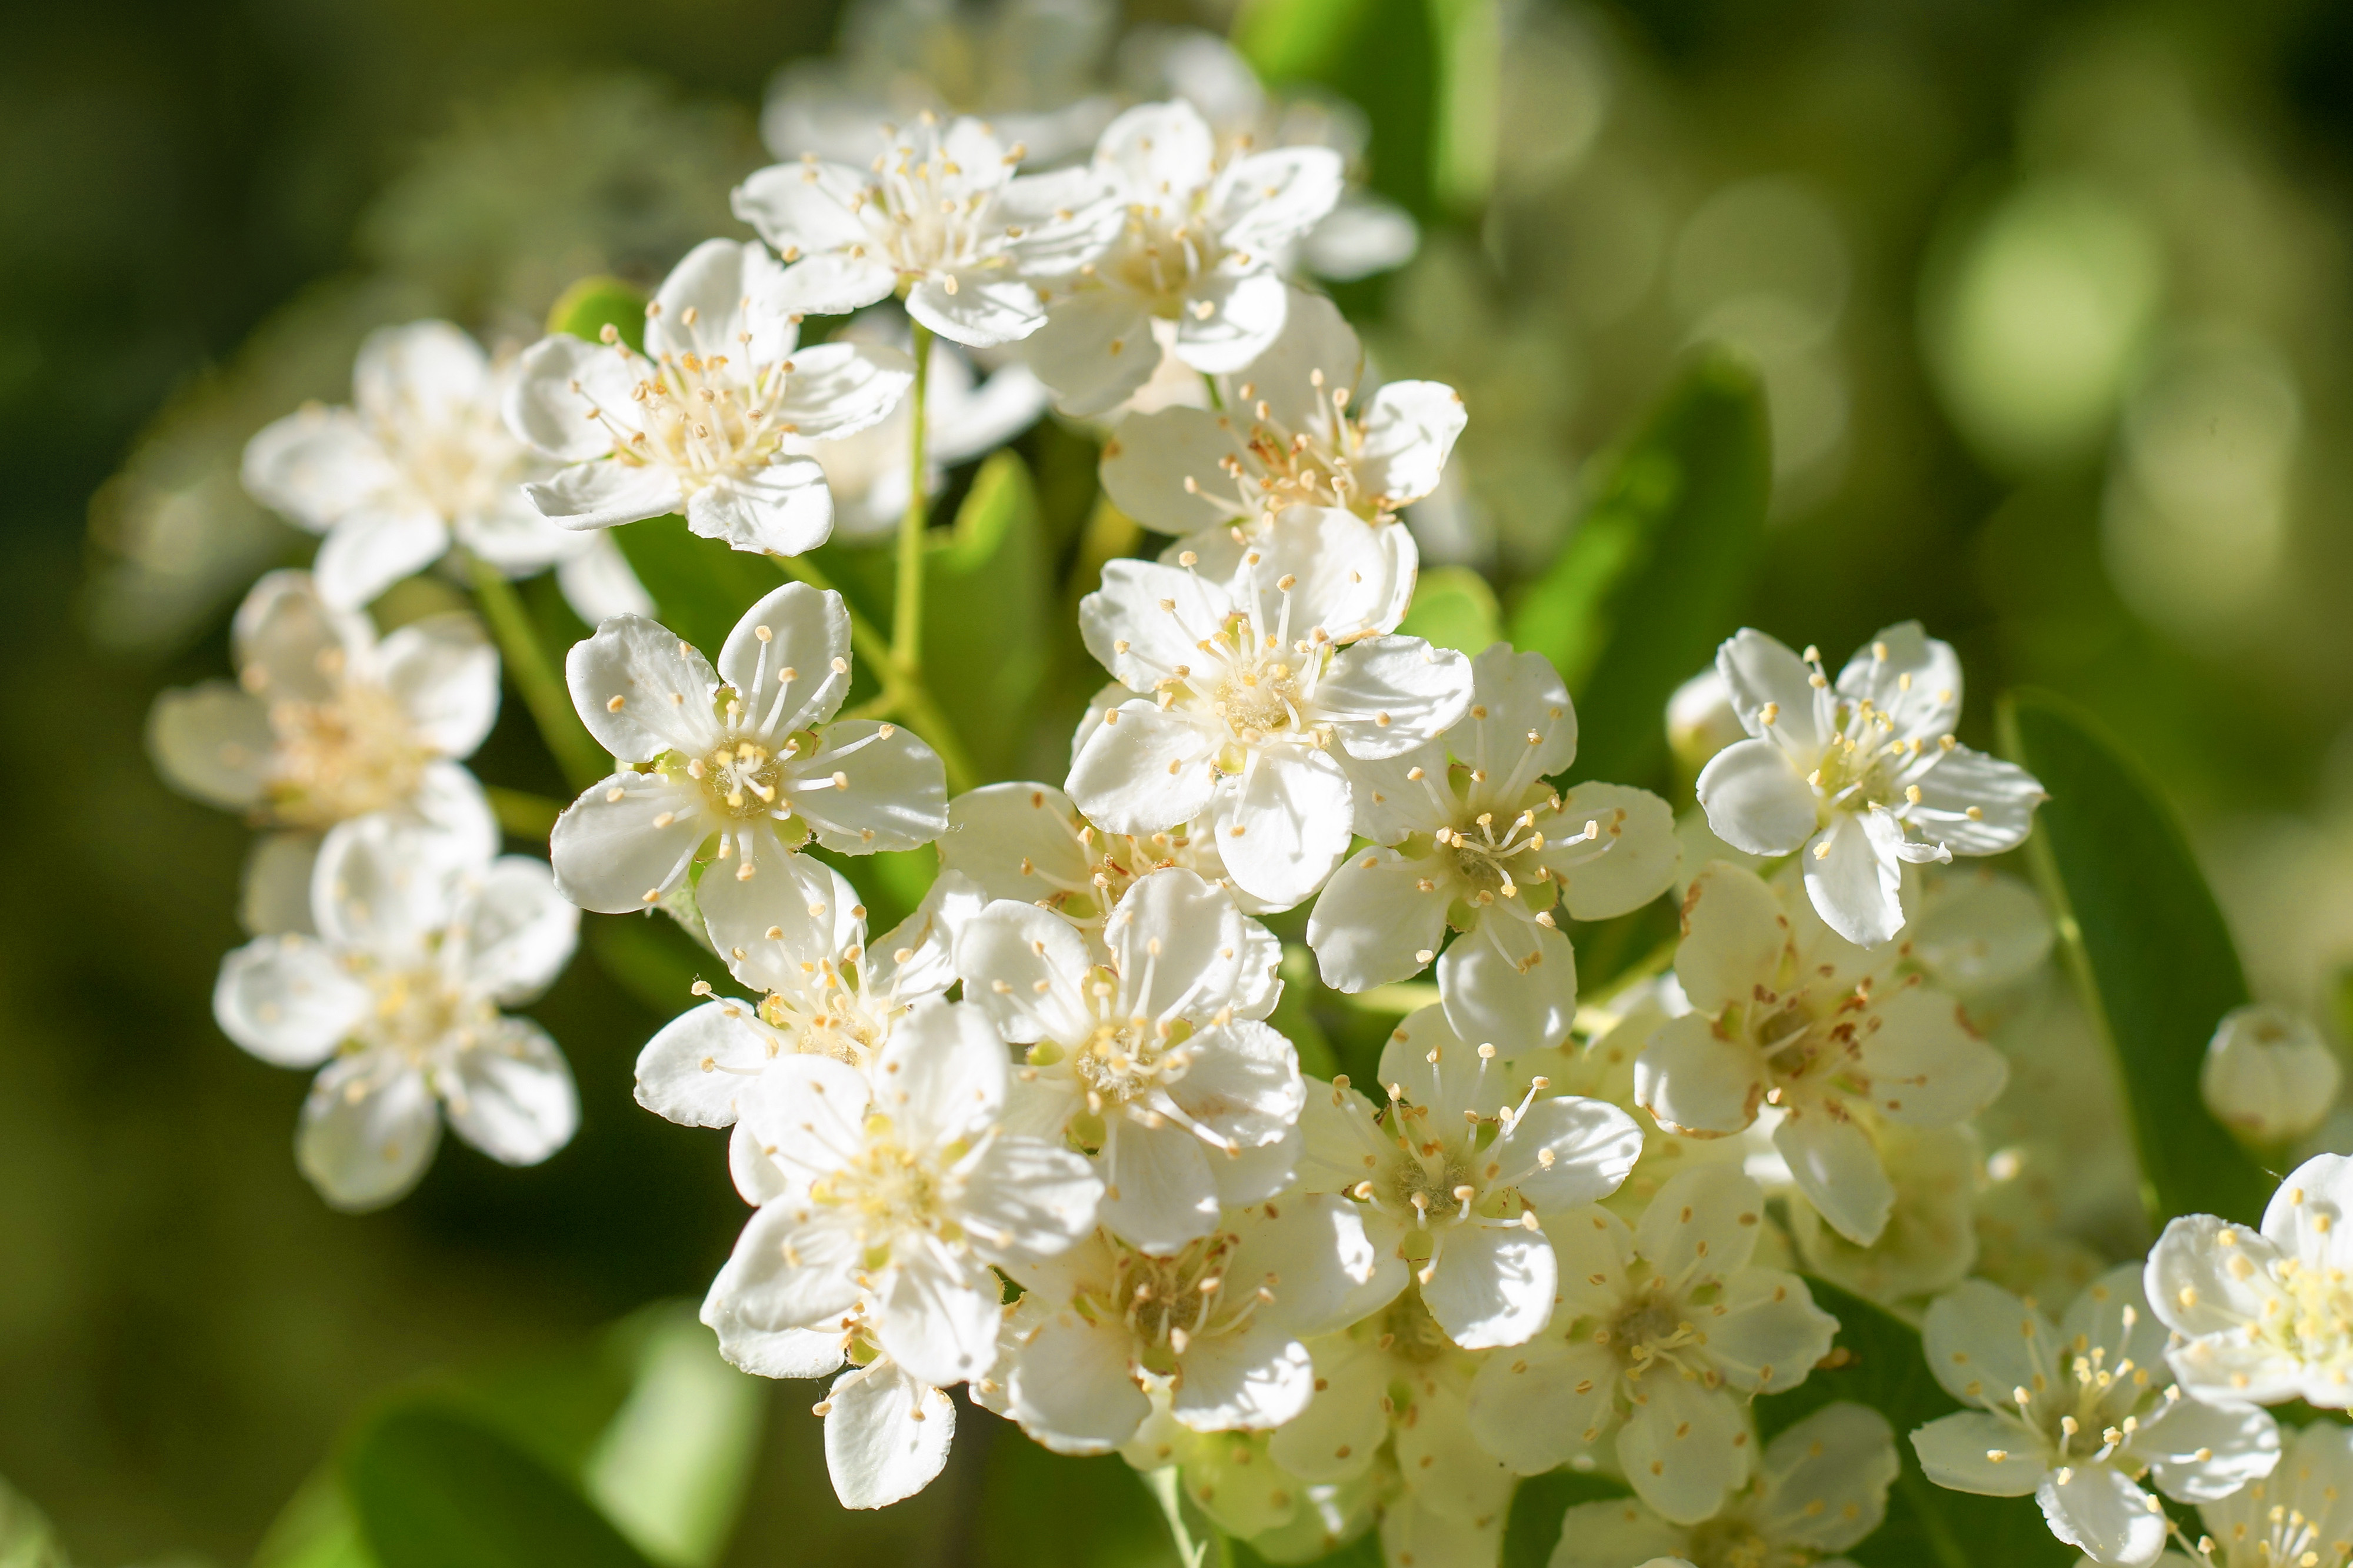 Two free photos of some small white flowers